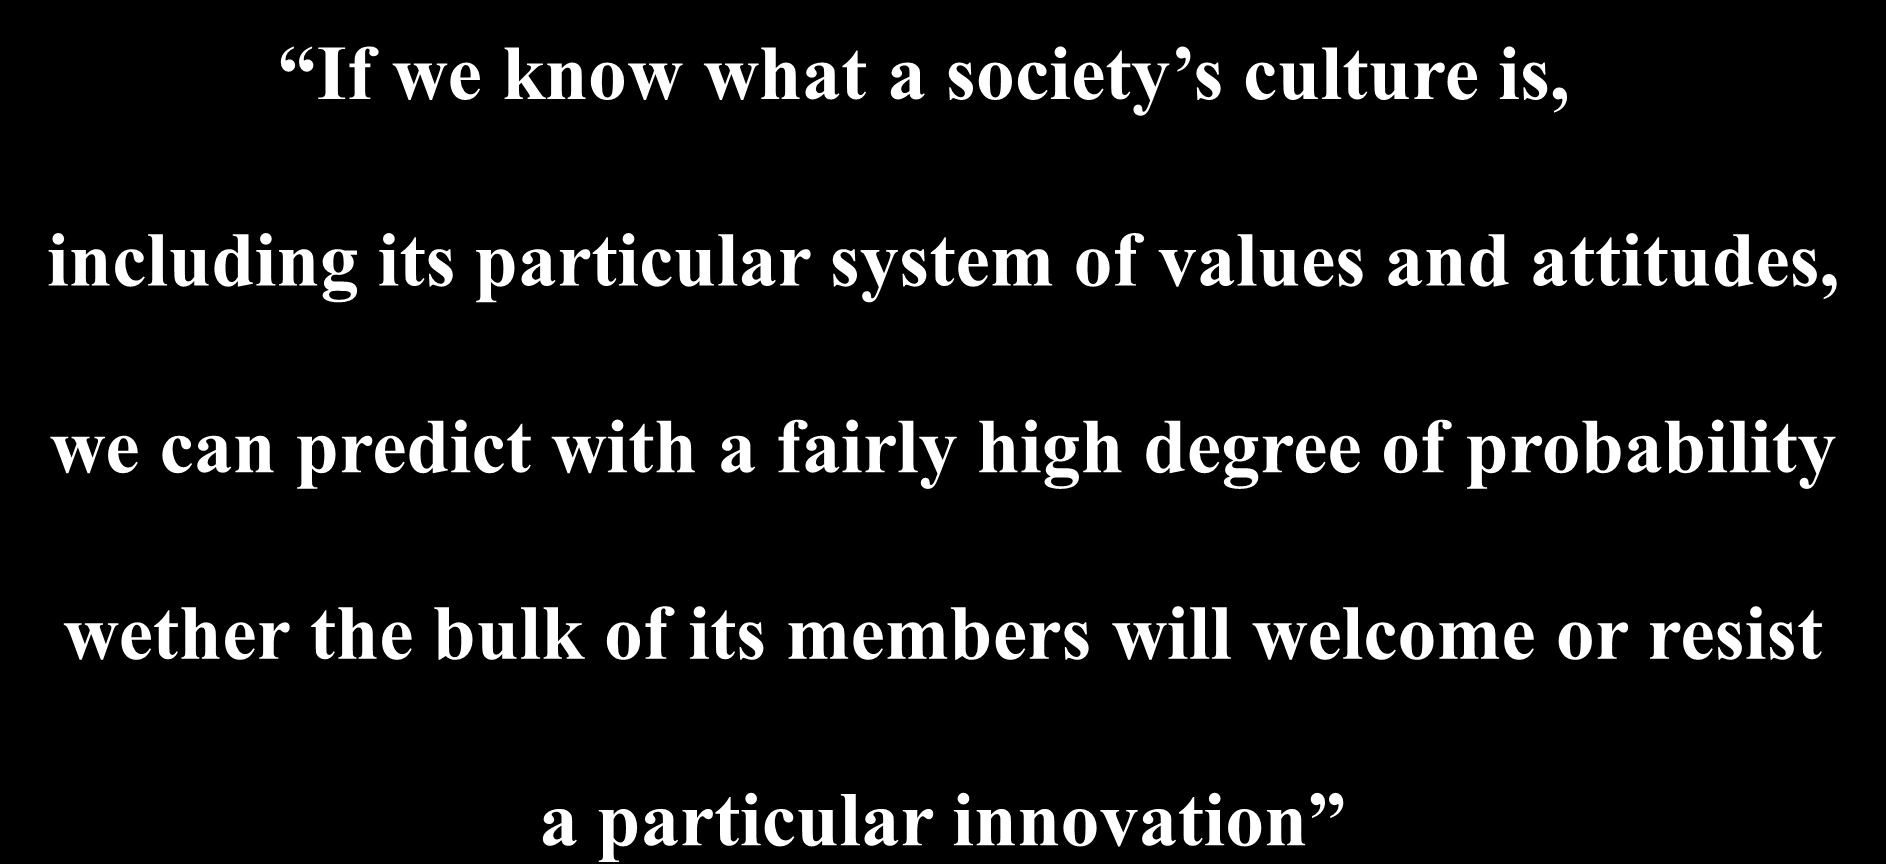 If we know what a society s culture is, including its particular system of values and attitudes, we can predict